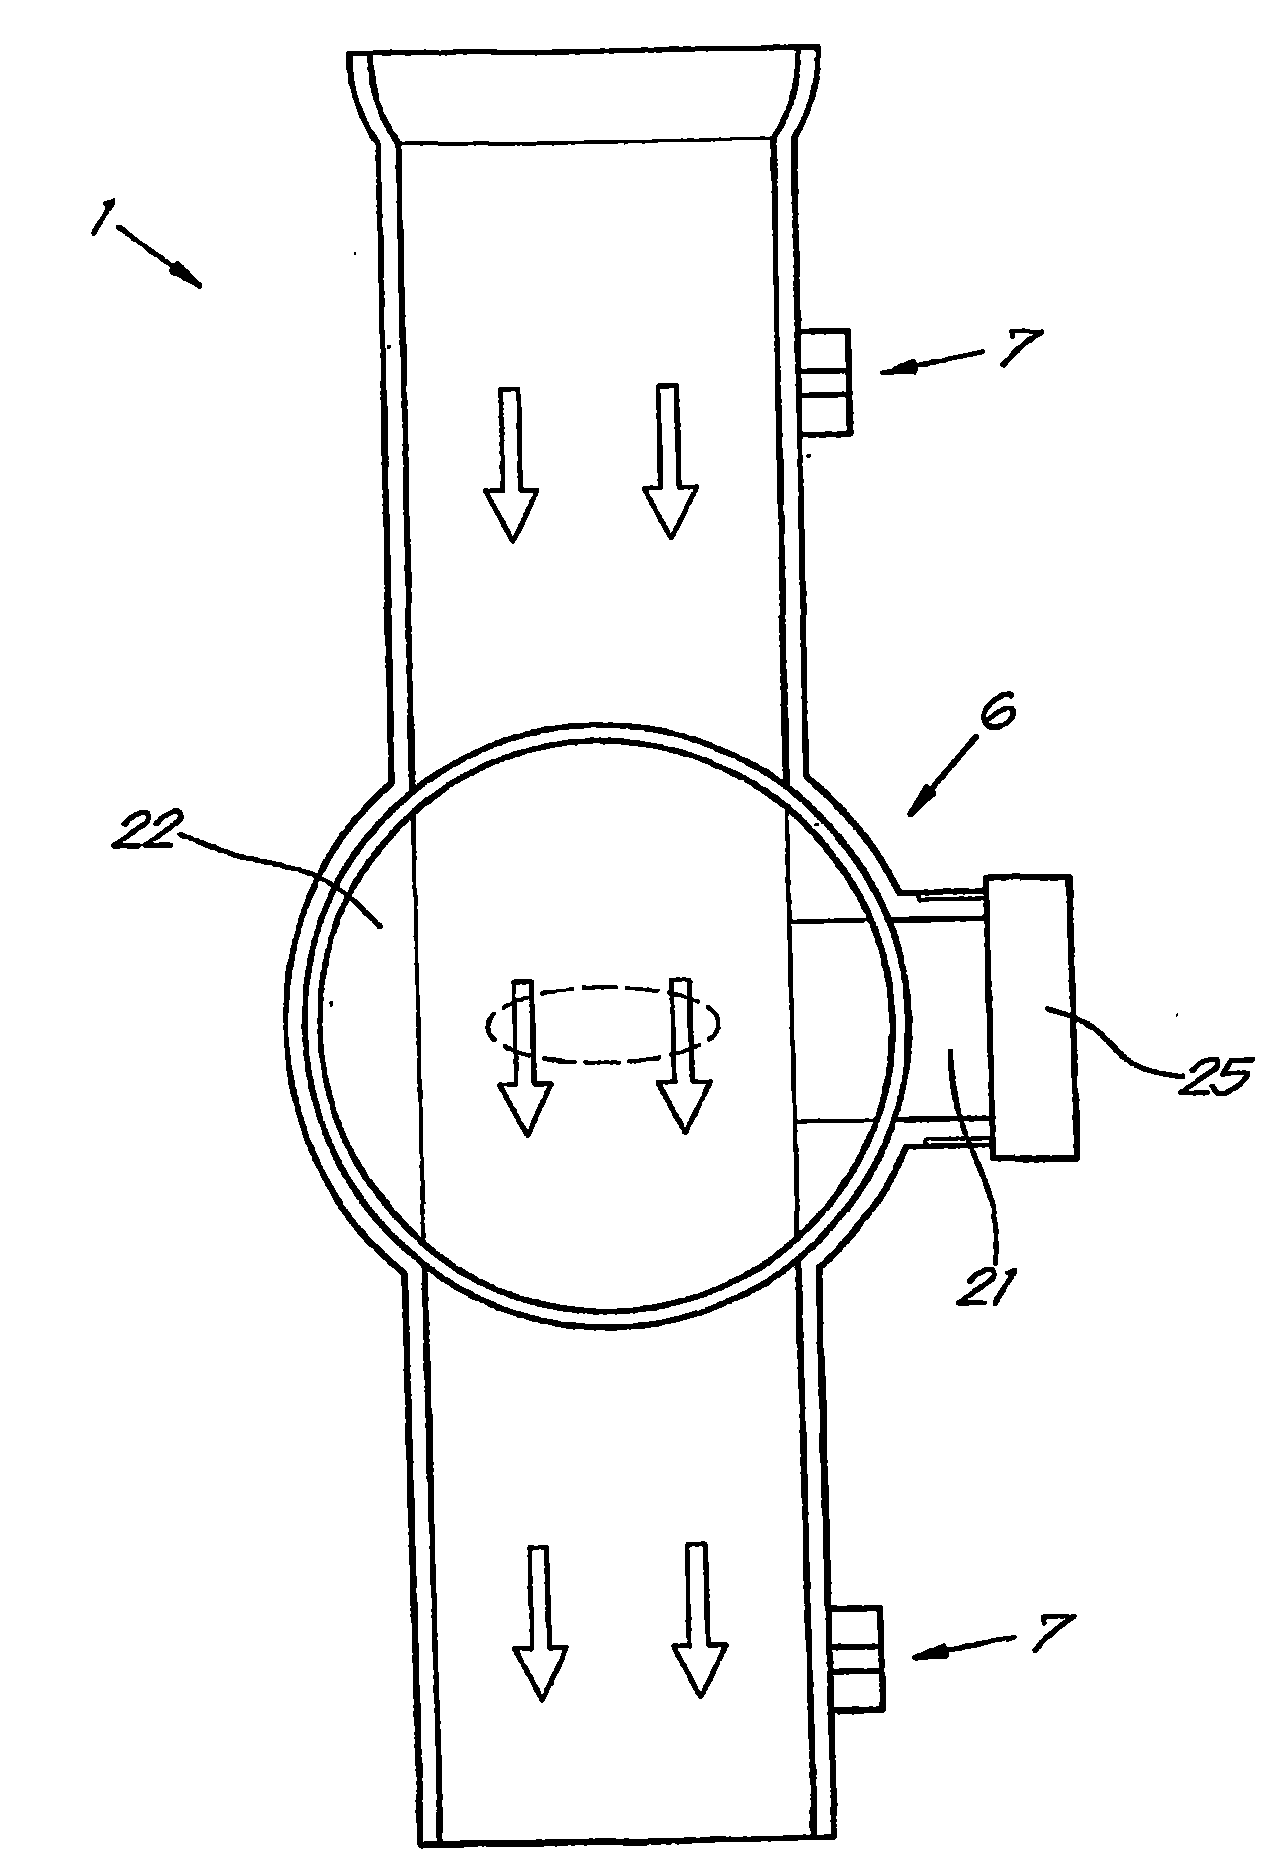 Method and equipment for detecting sealing deficiencies in drainage and vent systems for buildings